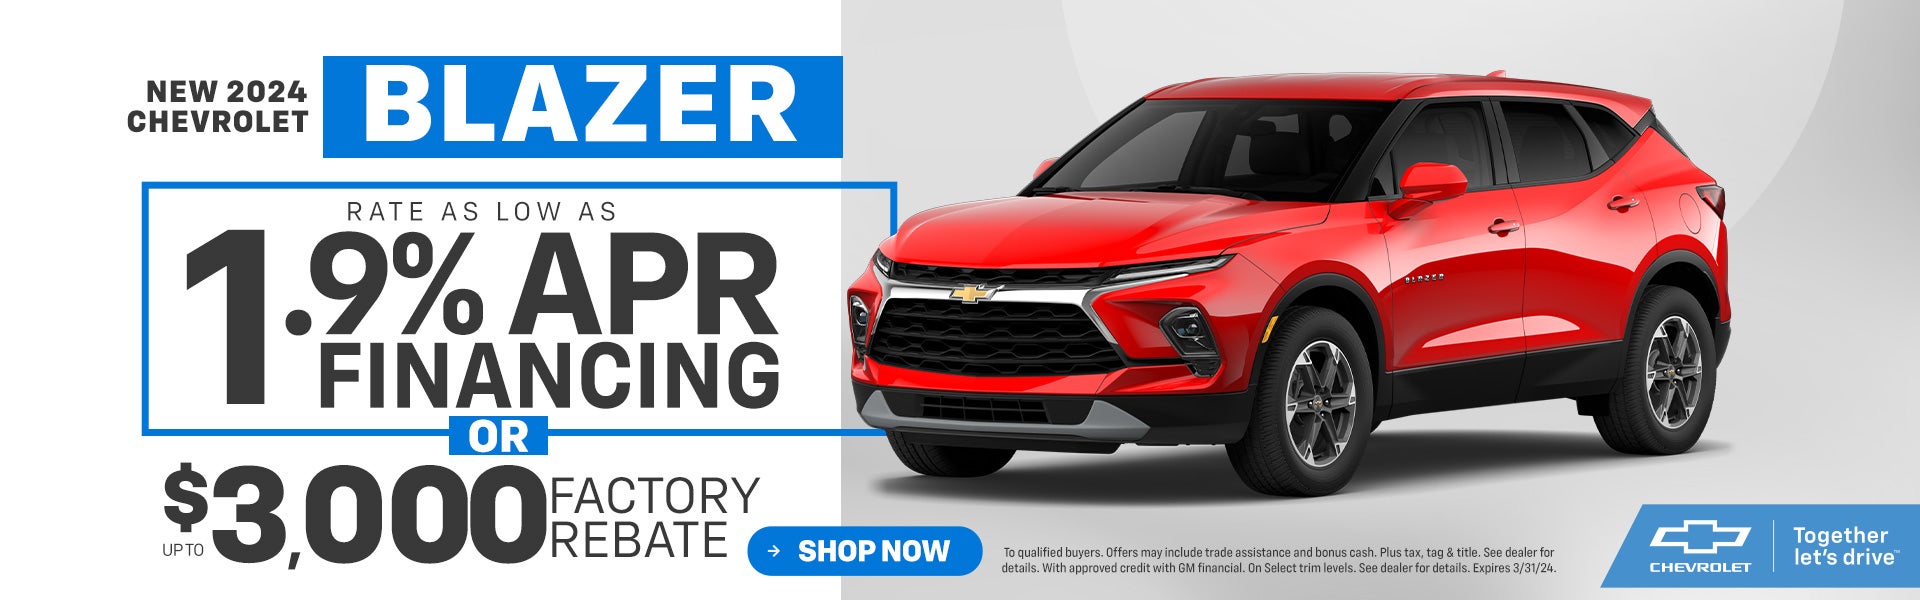 2024 Chevrolet Blazer	up to $3000 rebate or rates as low as 